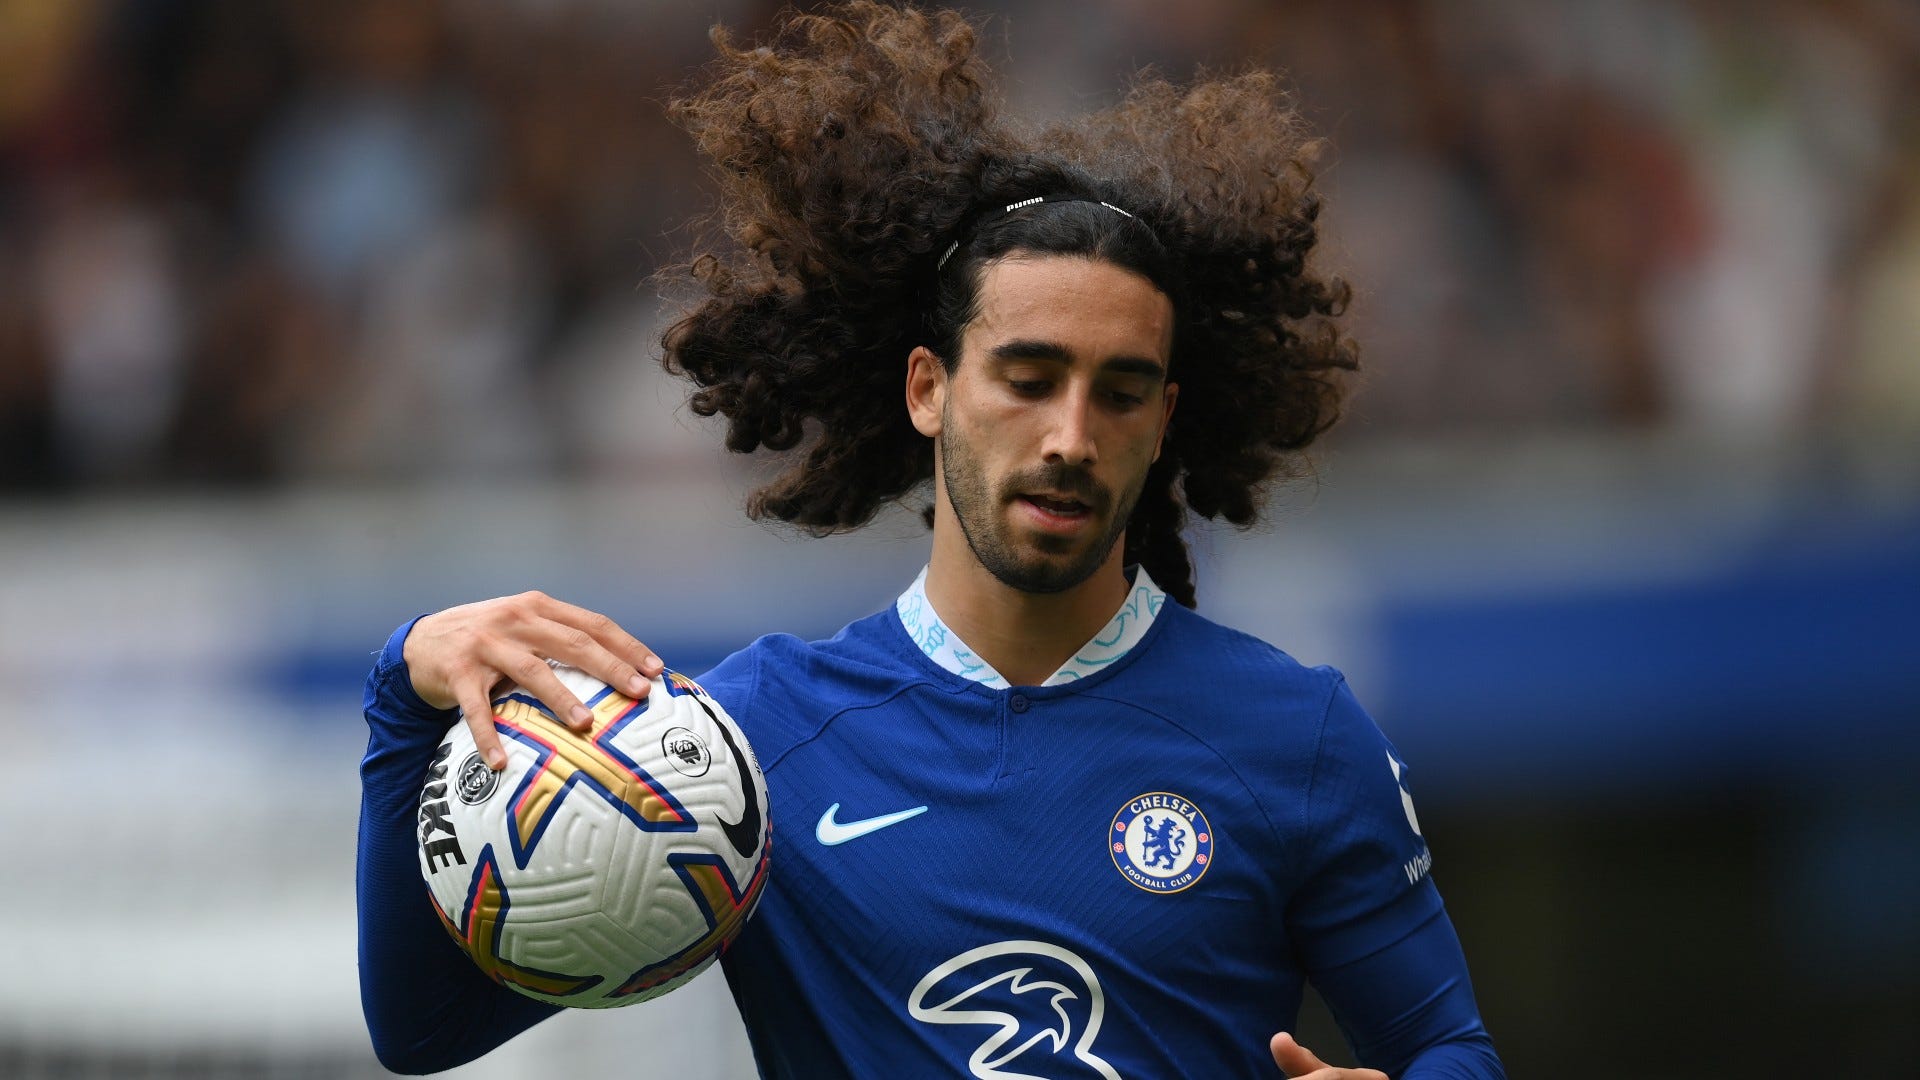 We don't want to see Cucurella anymore!' - £62m defender is not good enough for Chelsea, insists Leboeuf